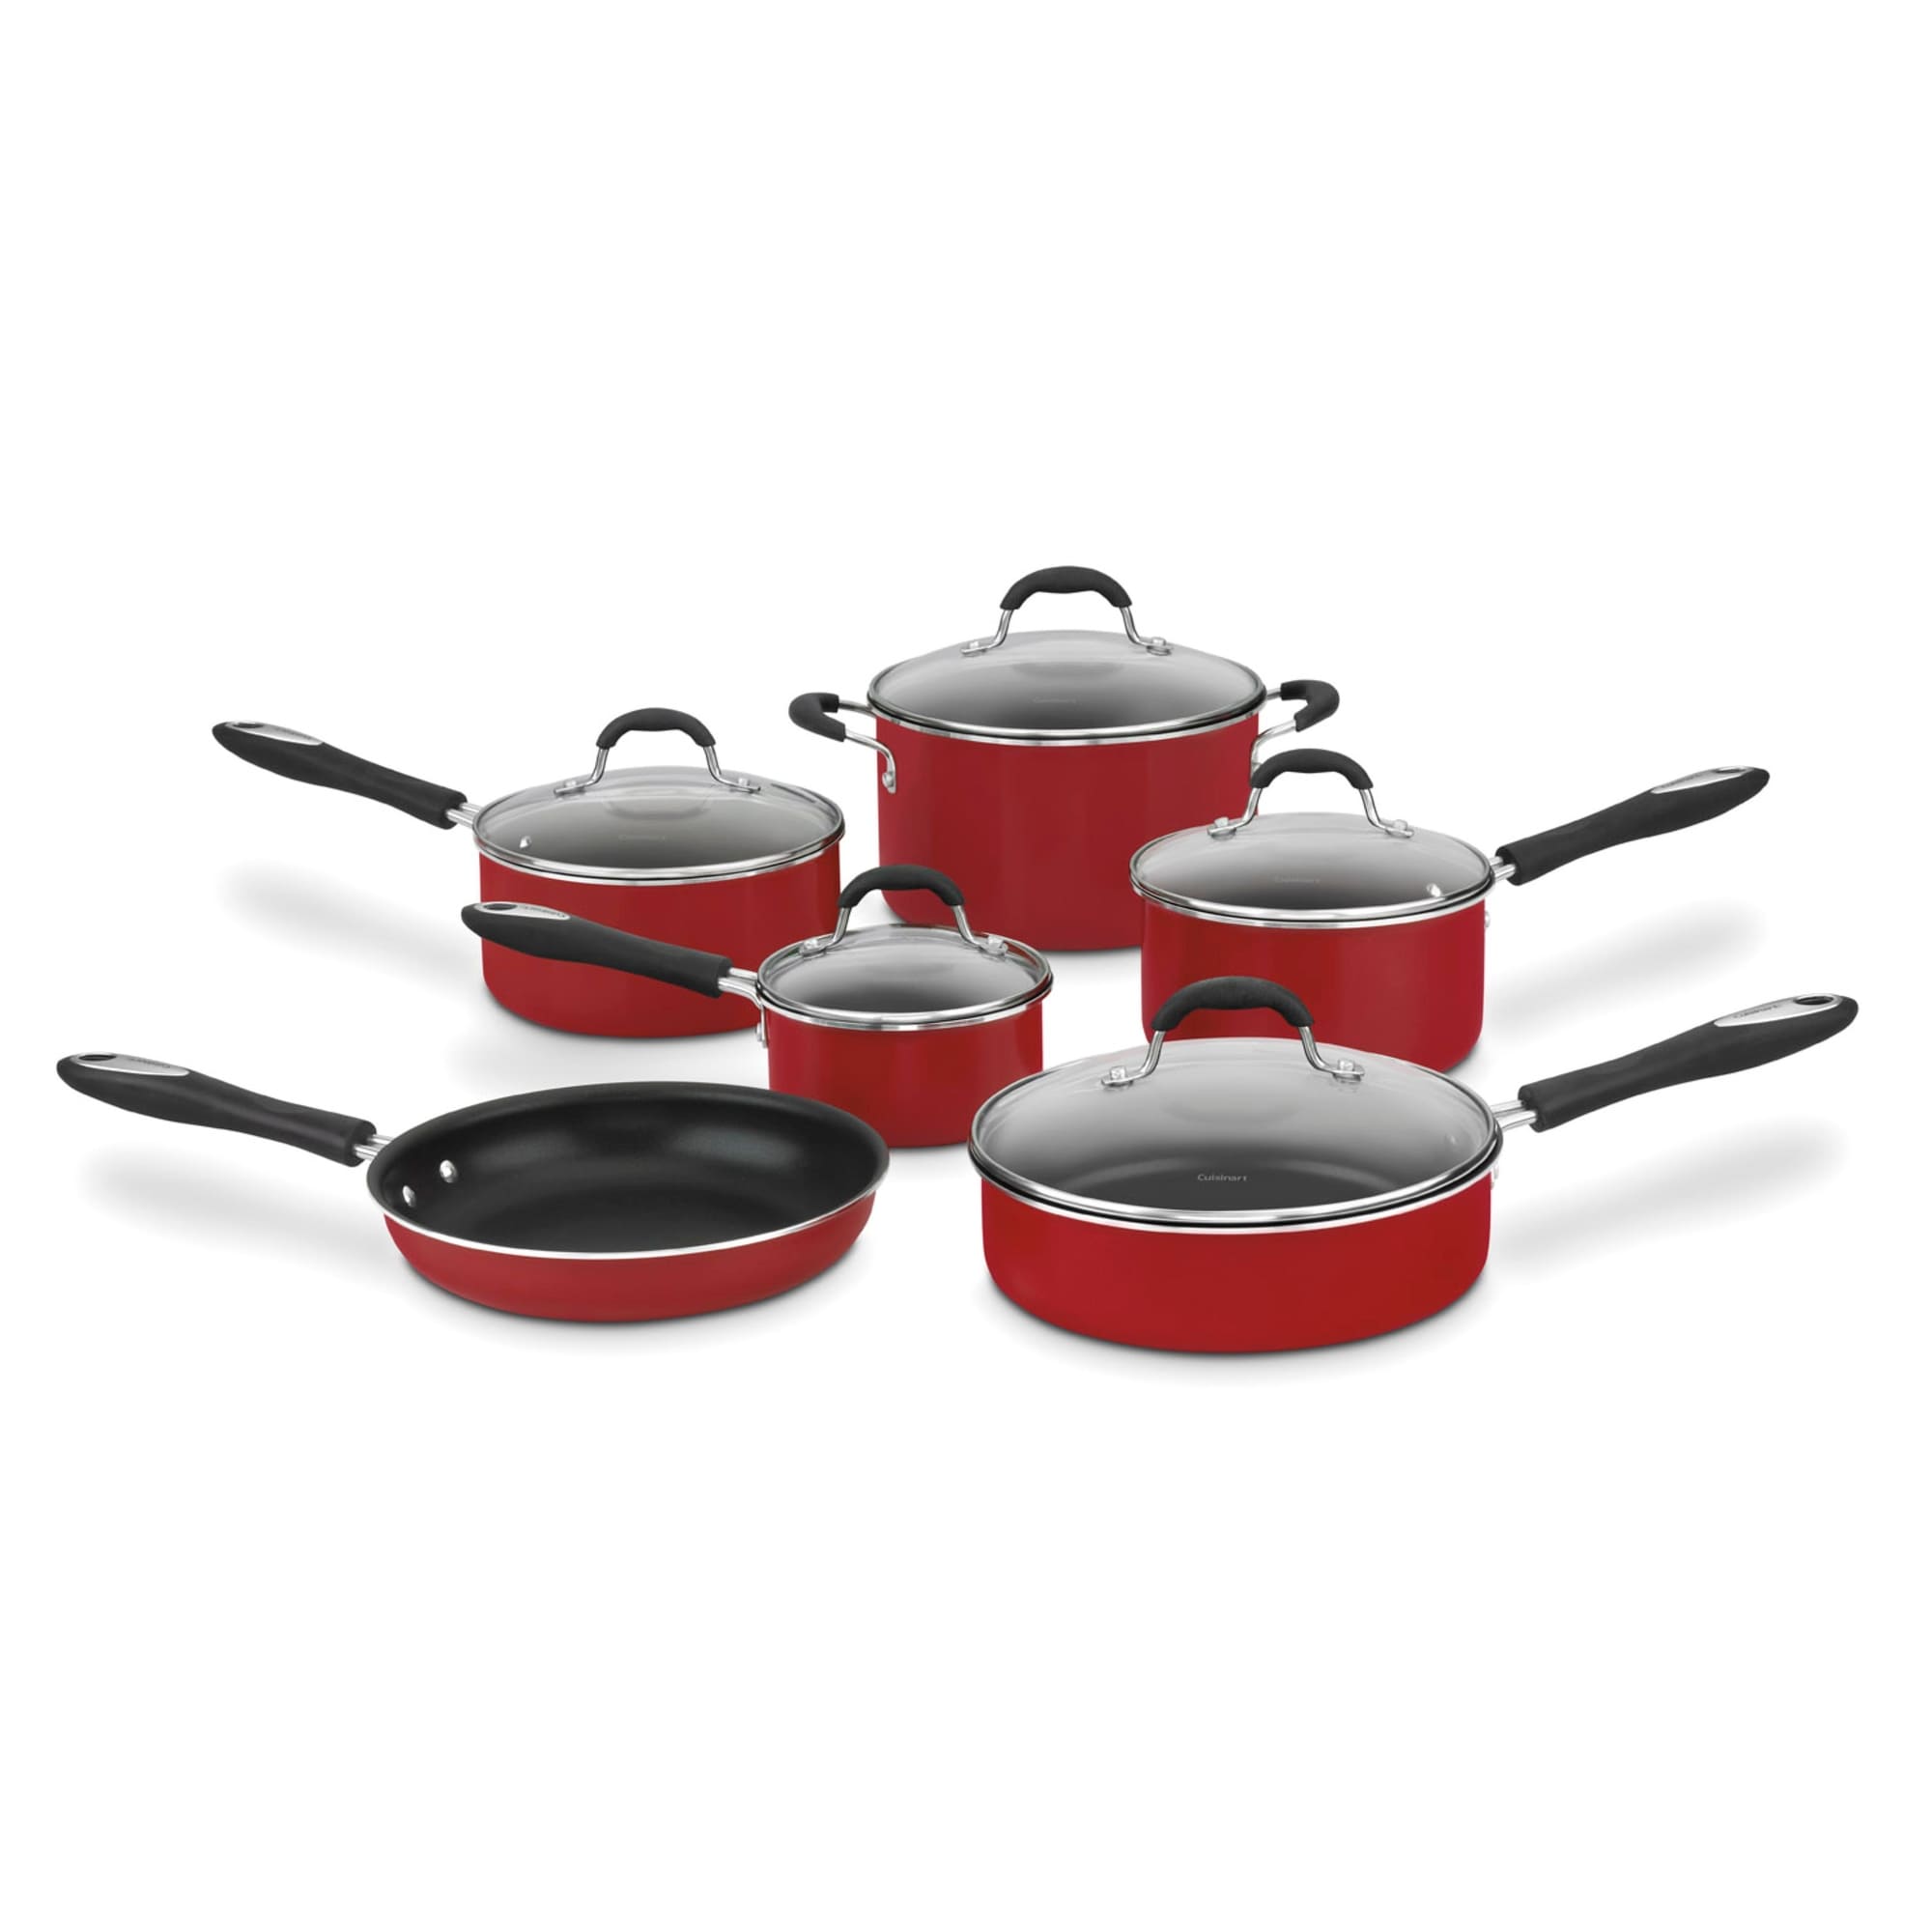 https://ak1.ostkcdn.com/images/products/is/images/direct/72beaf21aedbc6b68a9bfedf2fa452a1de46cc12/Cuisinart-Advantage%C2%AE-Nonstick-Cookware-11-Piece-Set.jpg